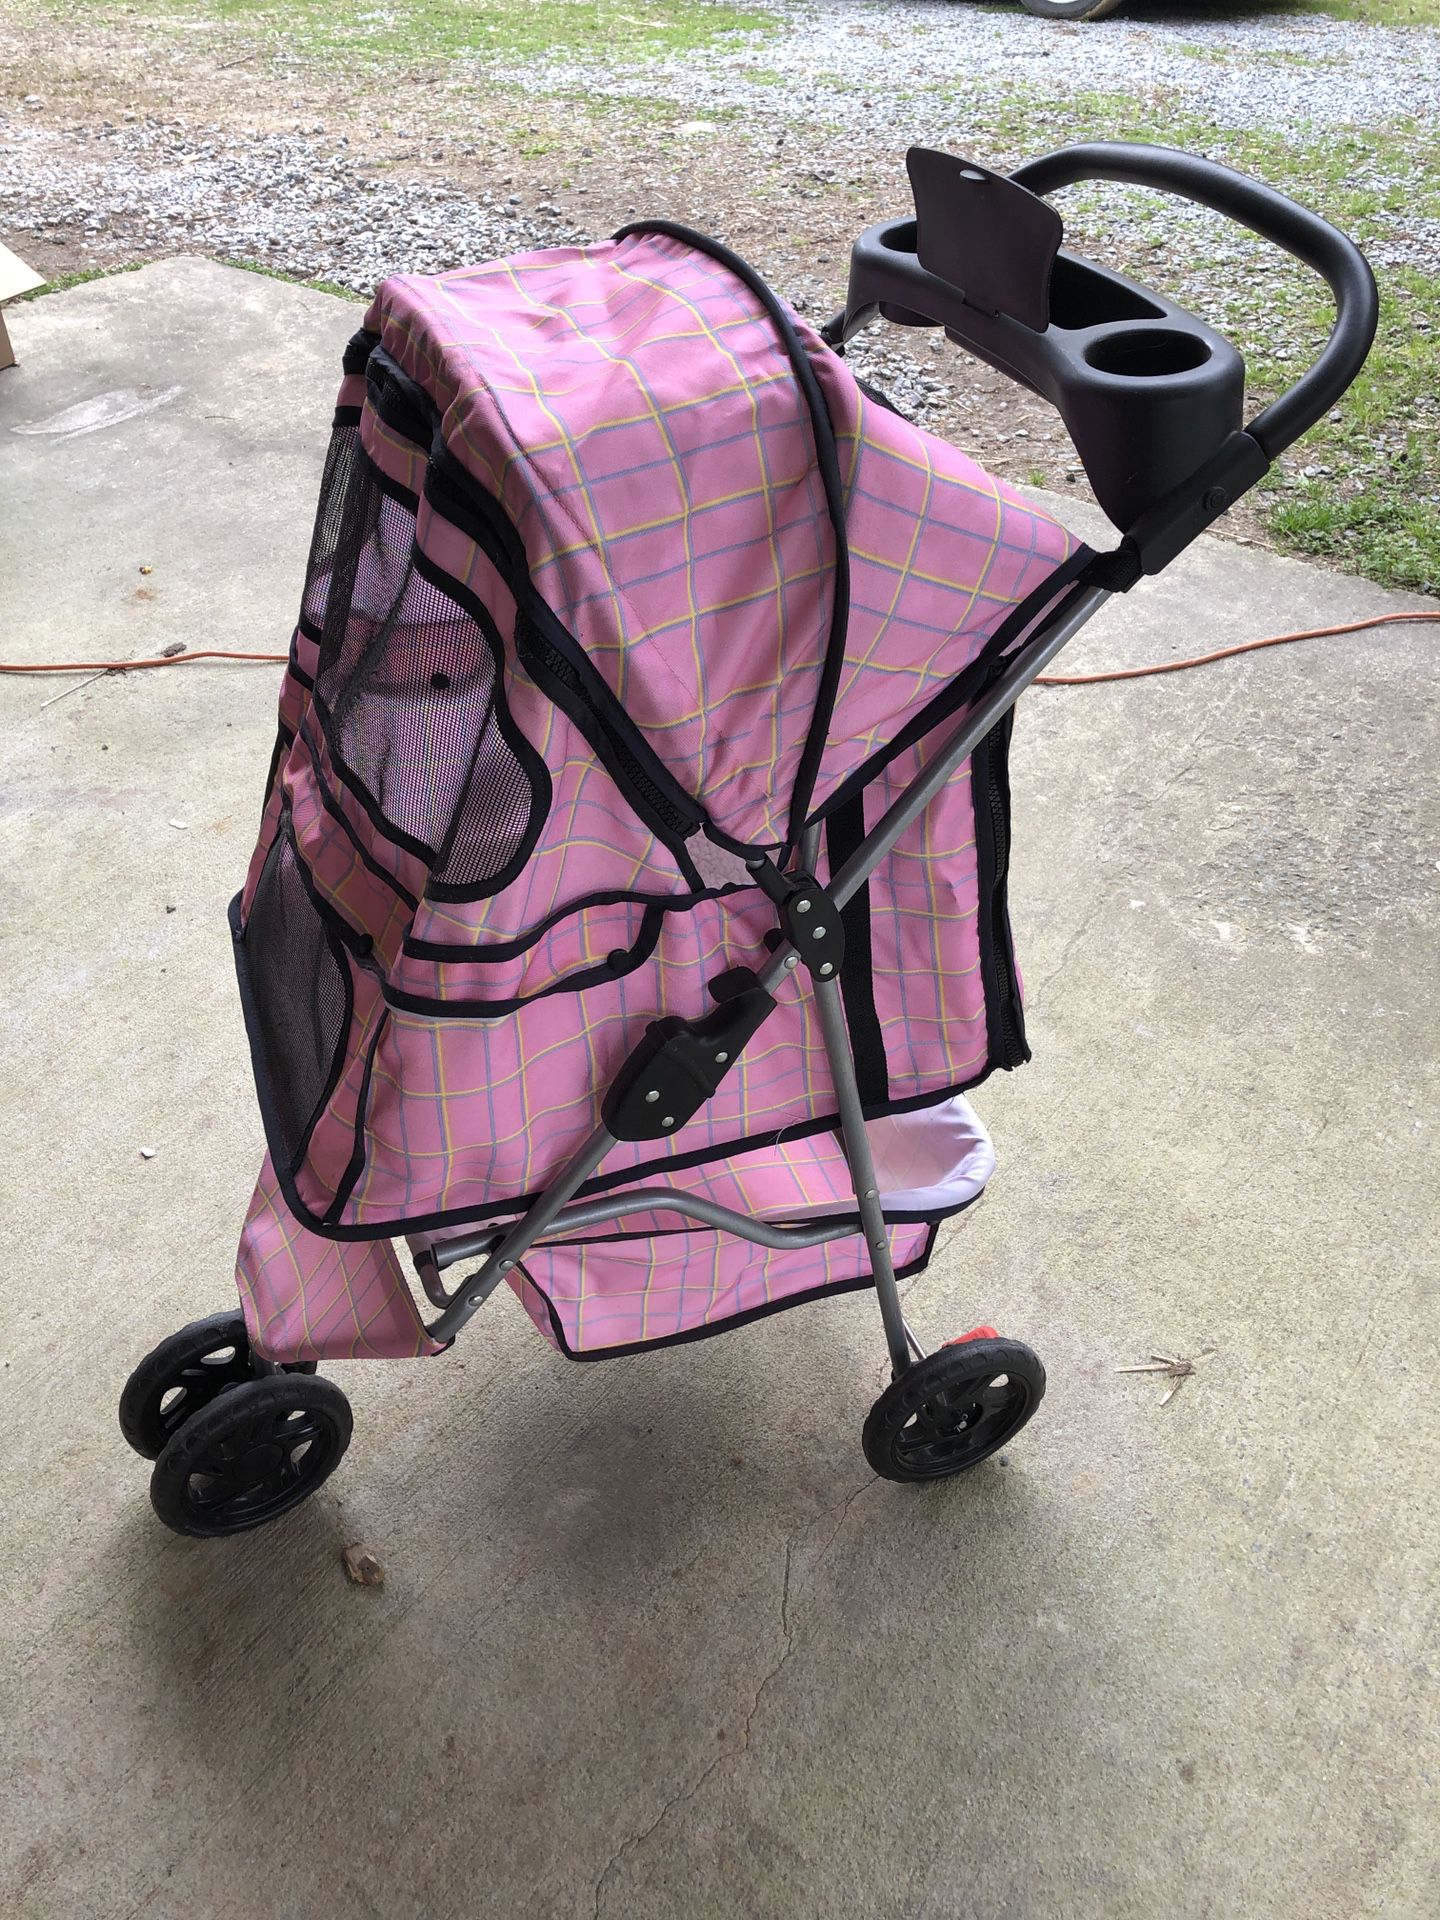 VERY NICE AND CUTE DOG STROLLER